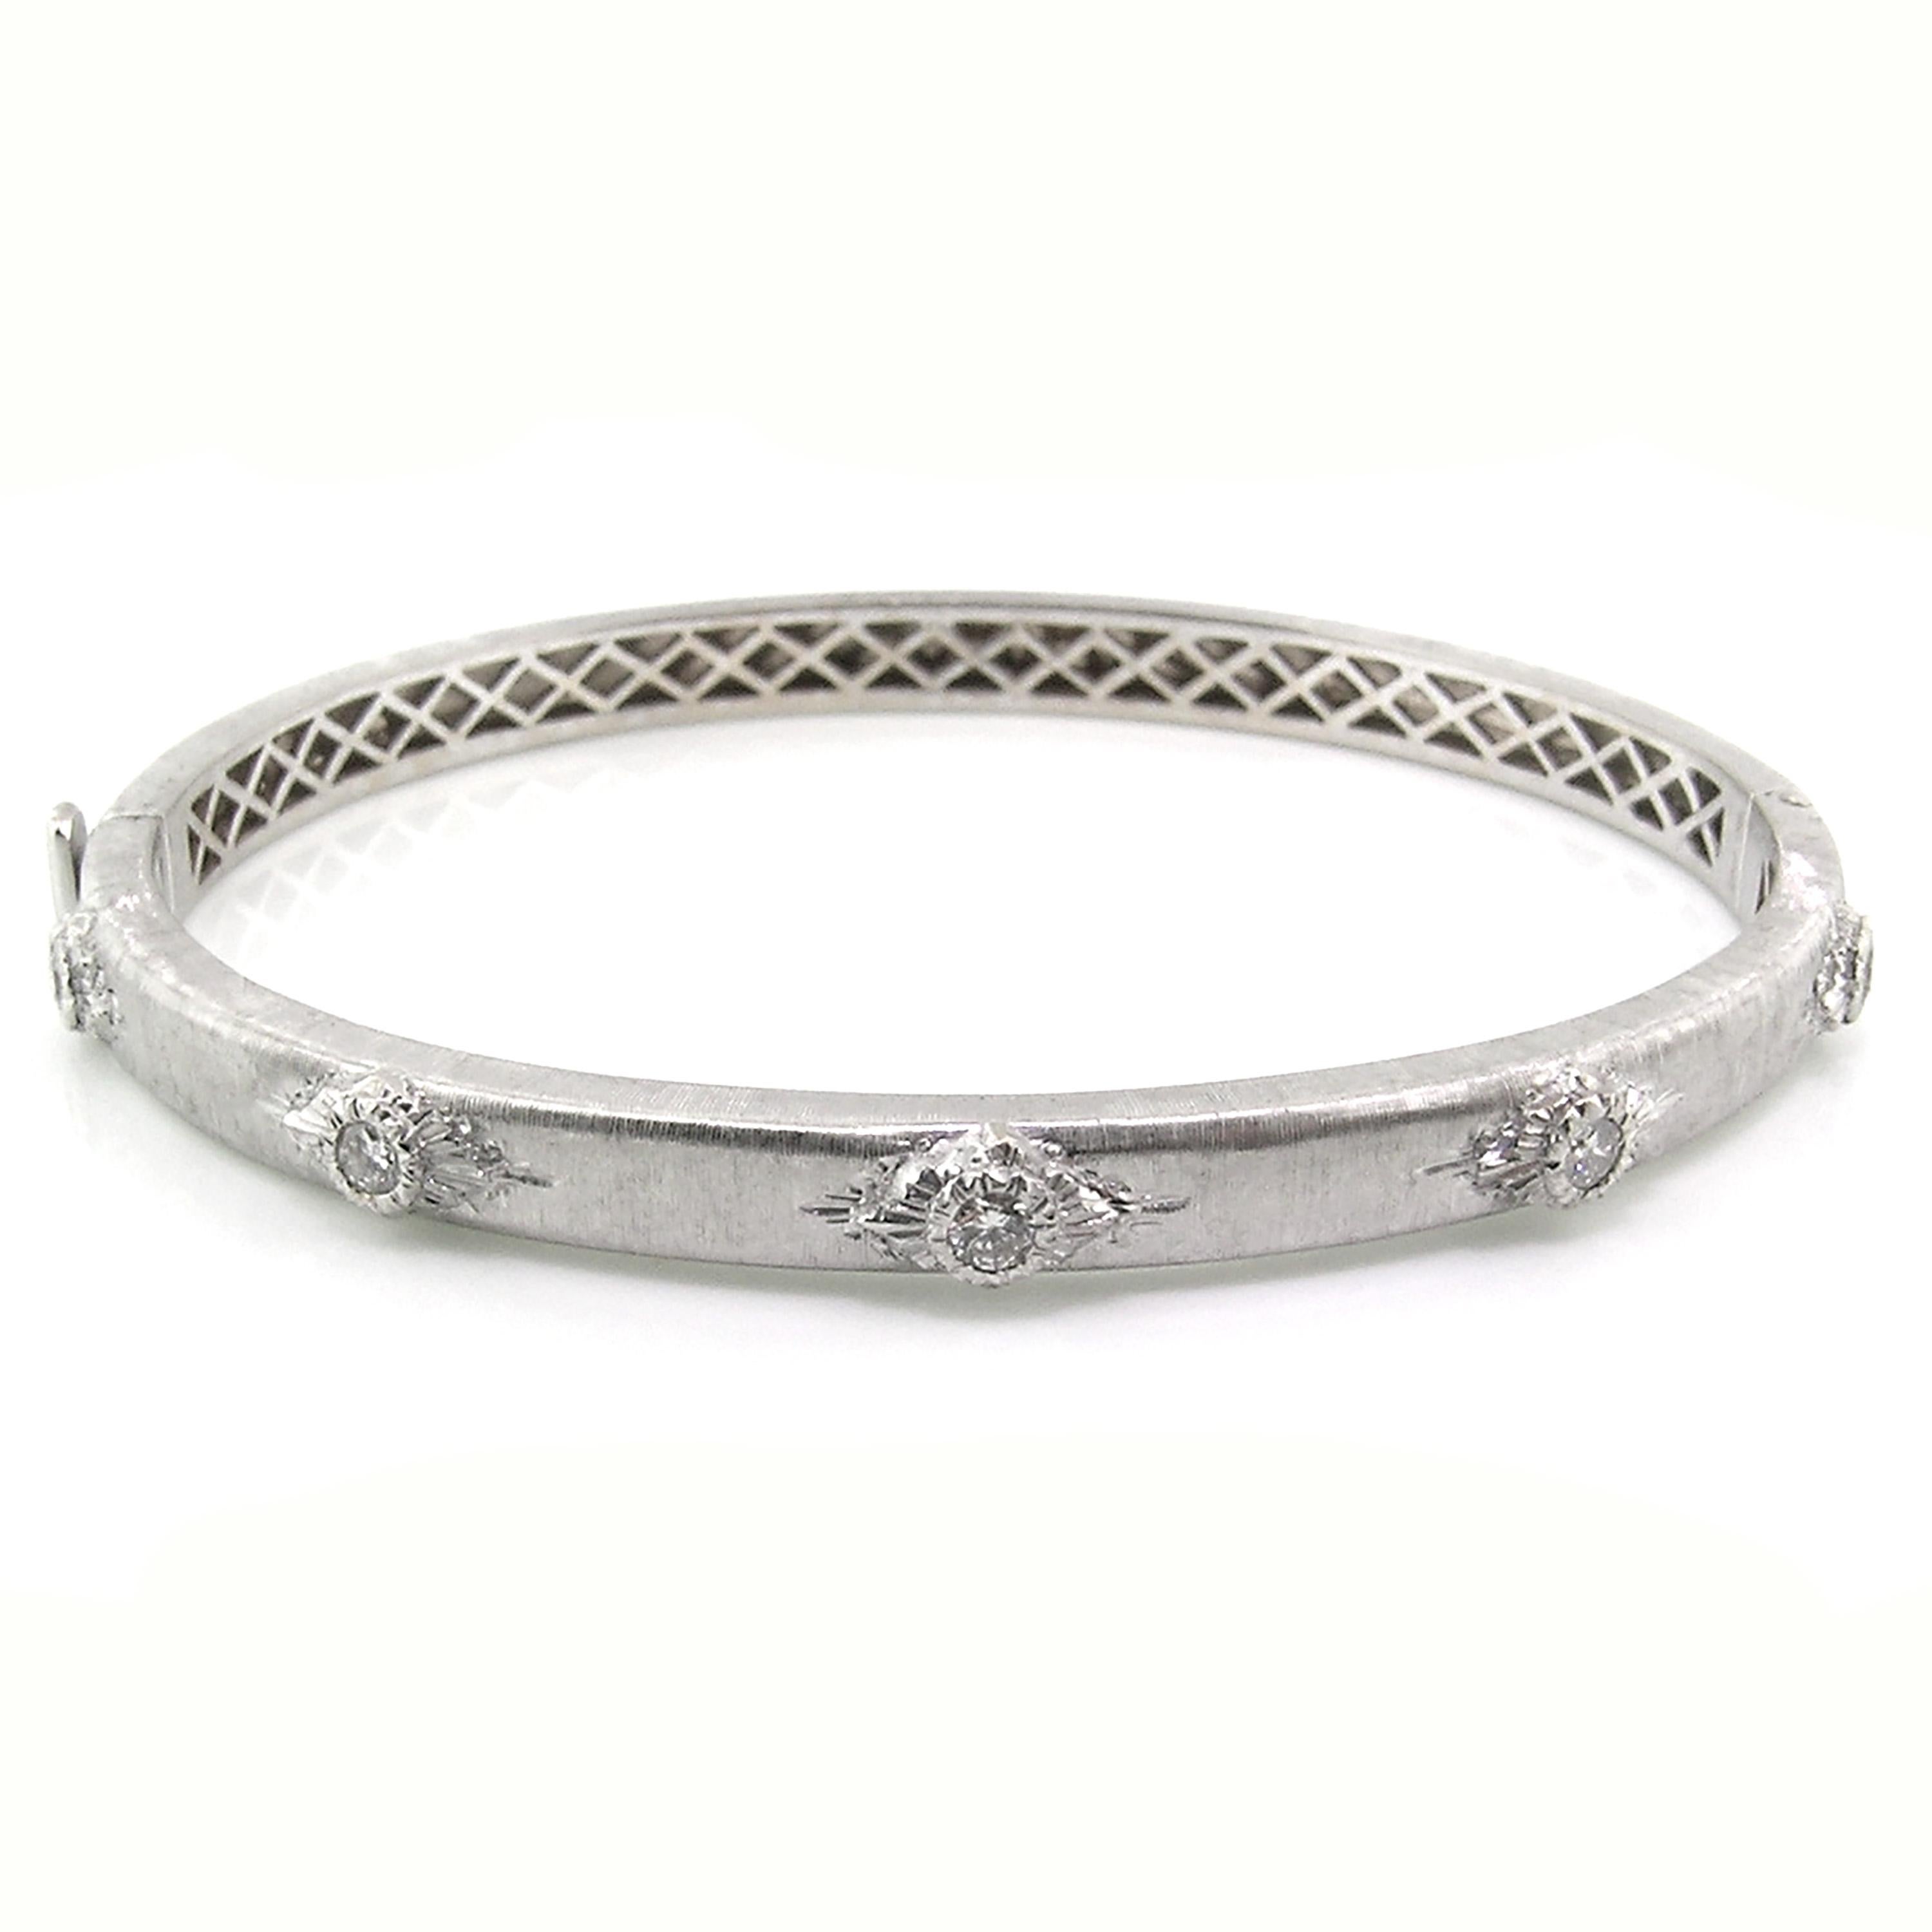 The Valentina Bangle is a classic staple for any jewelry wardrobe. Exquisitely executed details and fine diamonds are framed in an oval bangle which is perfectly suited to everyday wear. This bangle is especially fantastic when stacked in all three